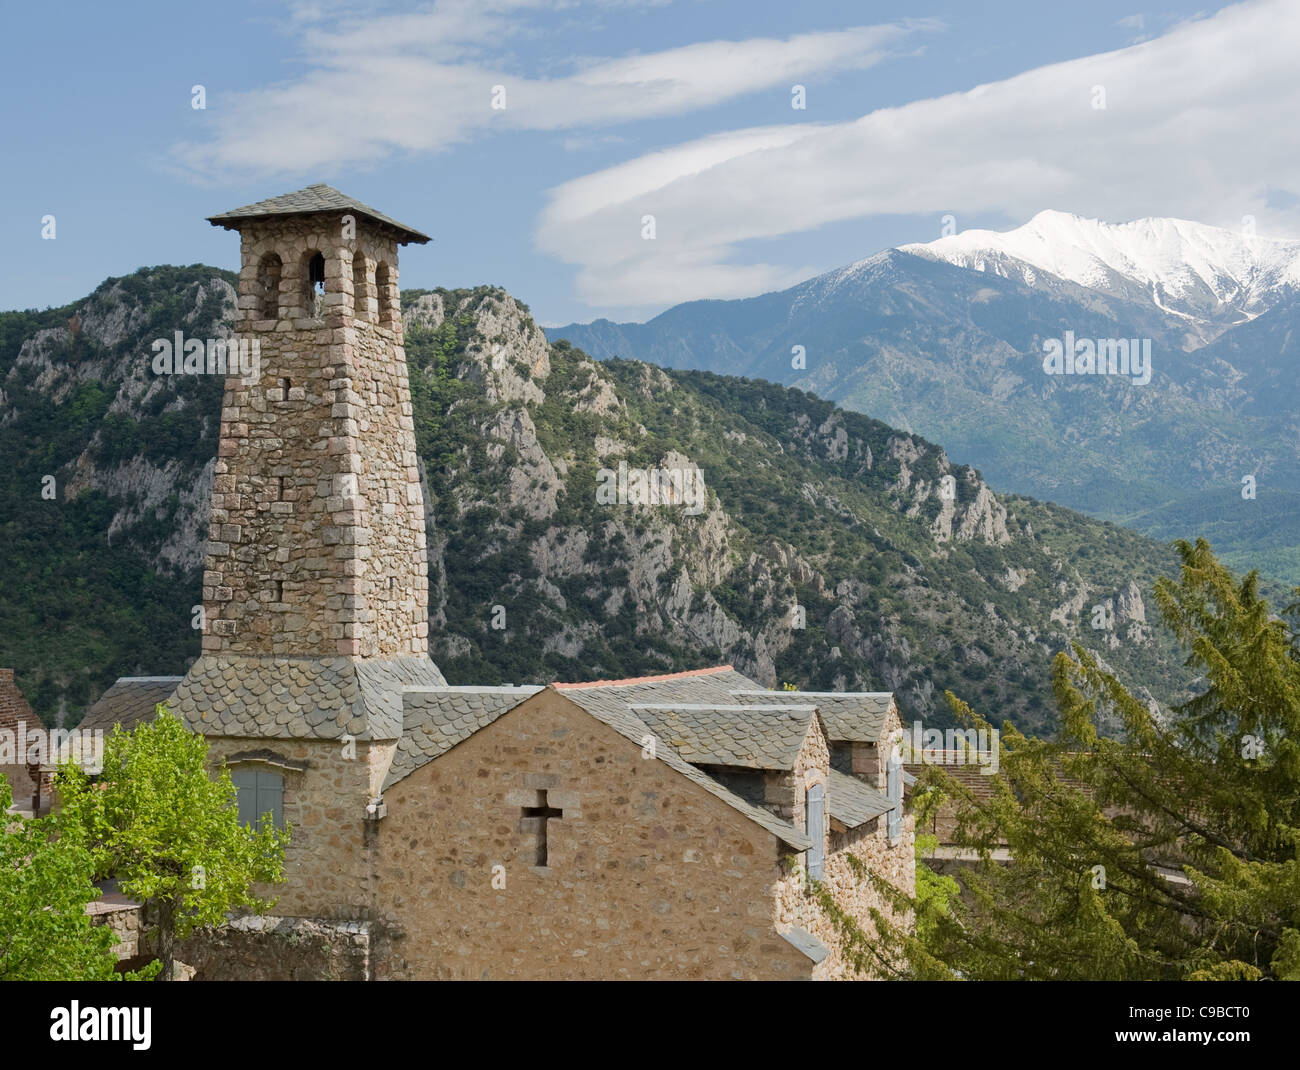 Clocheton of Fort Libéria by Vauban above the Pyrénées town of Villefranche-de-Conflent, a UNESCO world heritage site in France Stock Photo